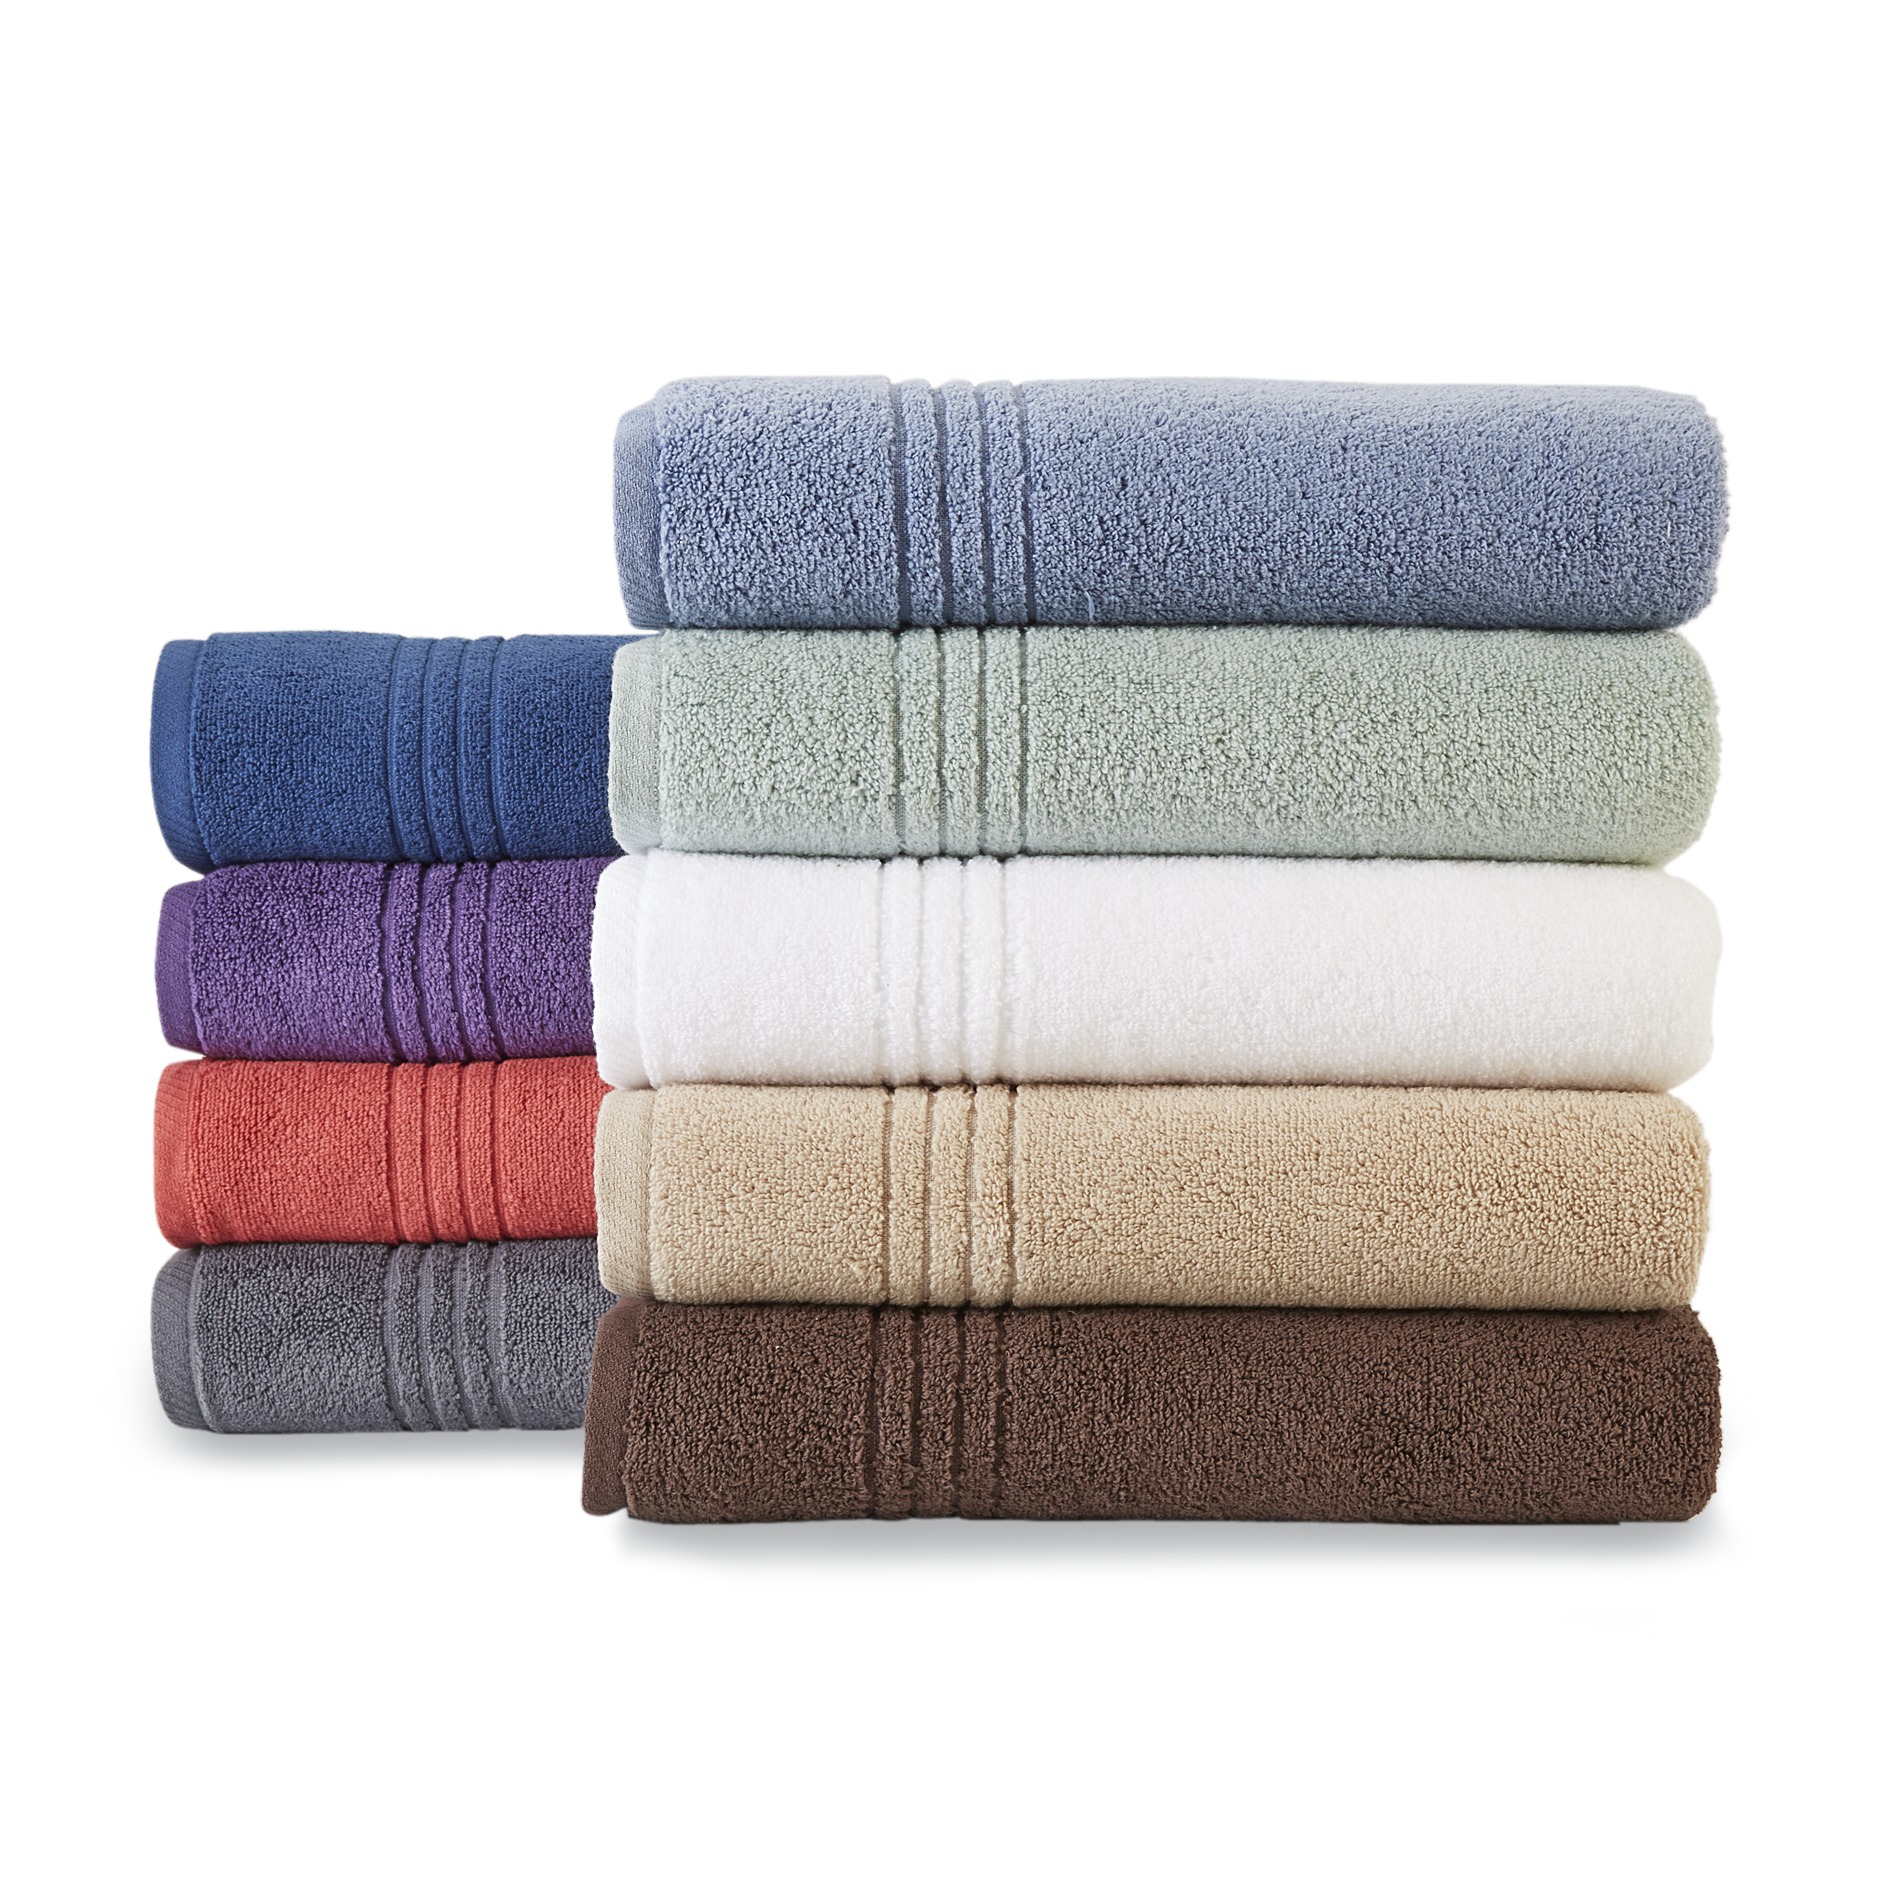 Dark Grey Woven Solid Color Absorbent Towels Eco-Friendly Bathroom Towels 12-Pack Washcloth Set PureSoft Collection 